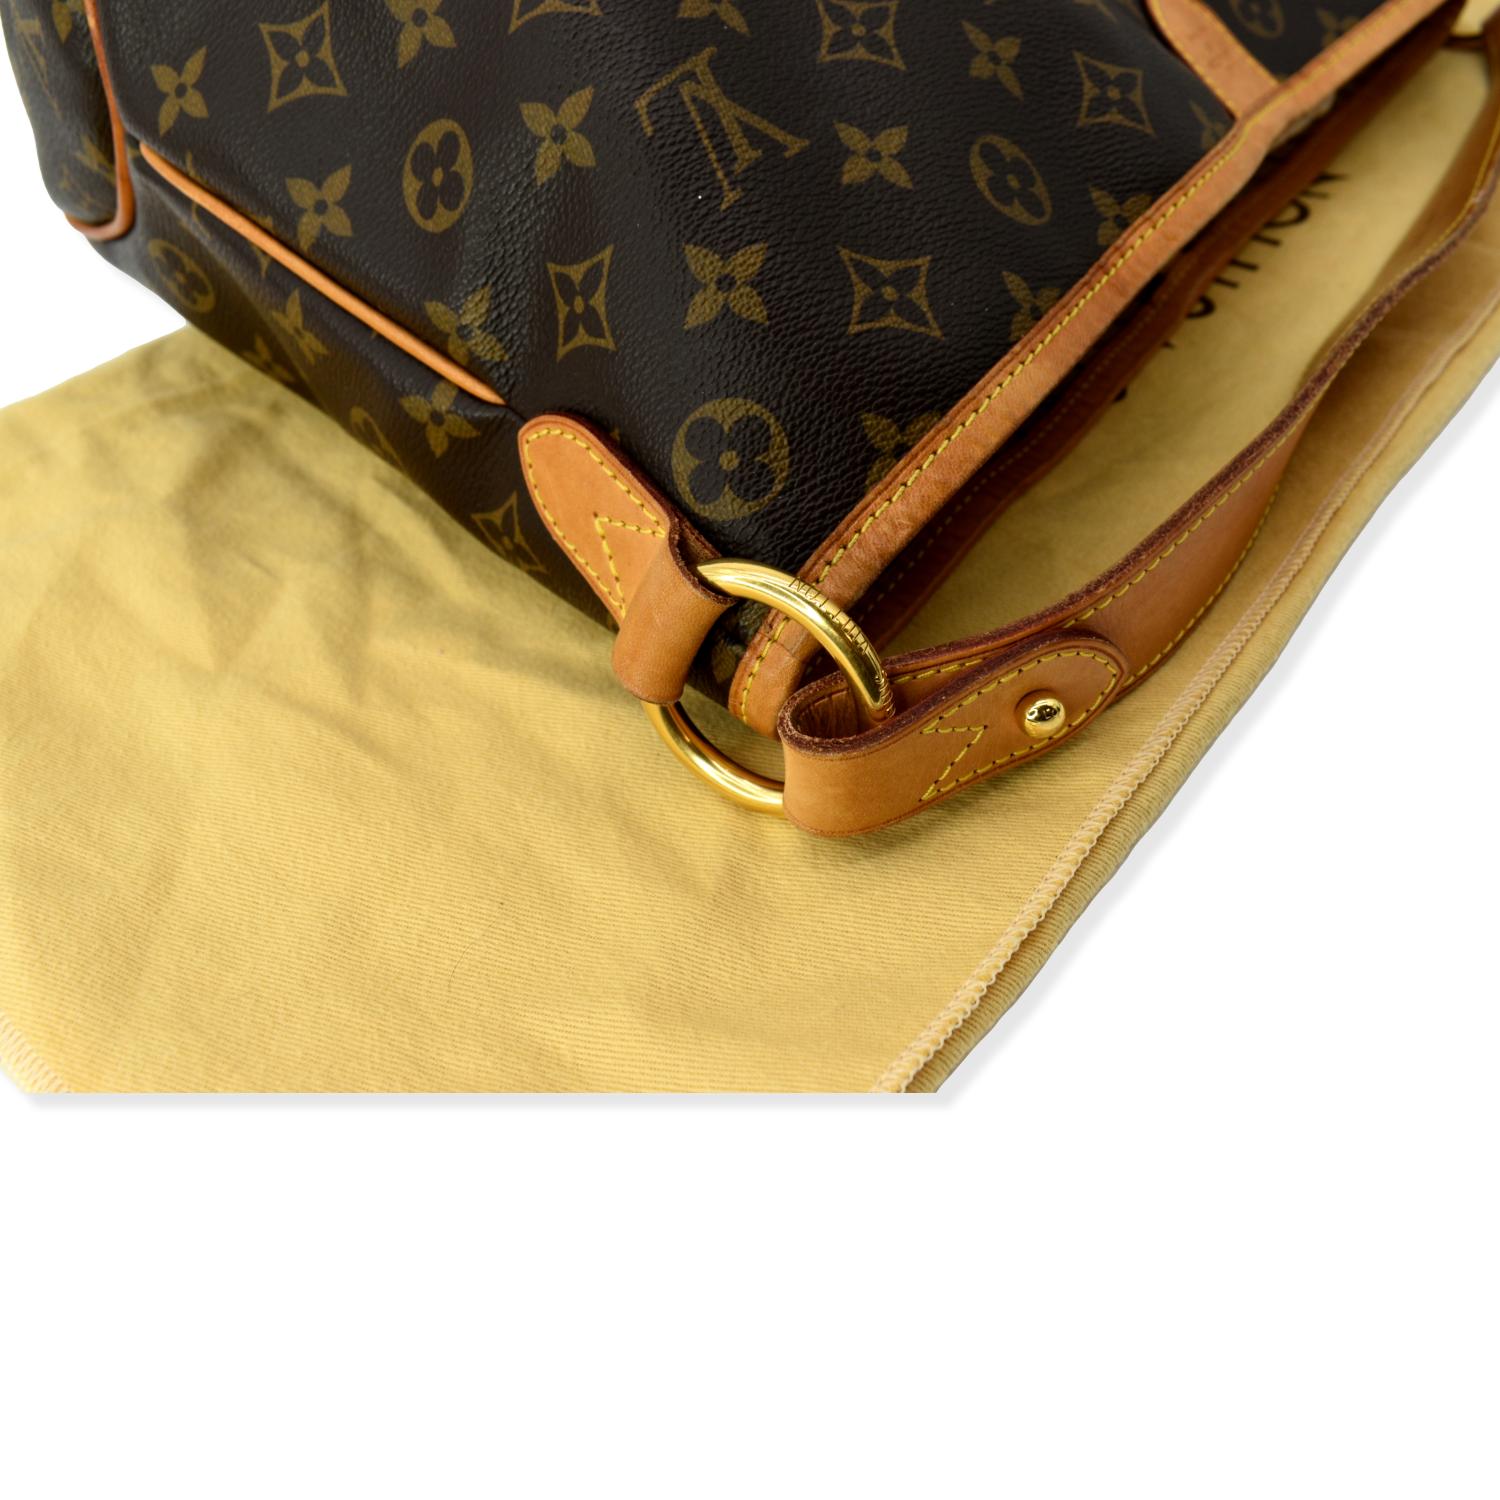 MODA ARCHIVE X REBAG Pre-owned Louis Vuitton Limited Edition Cruiser Blurry  Monogram Canvas Hobo Pm - Brown